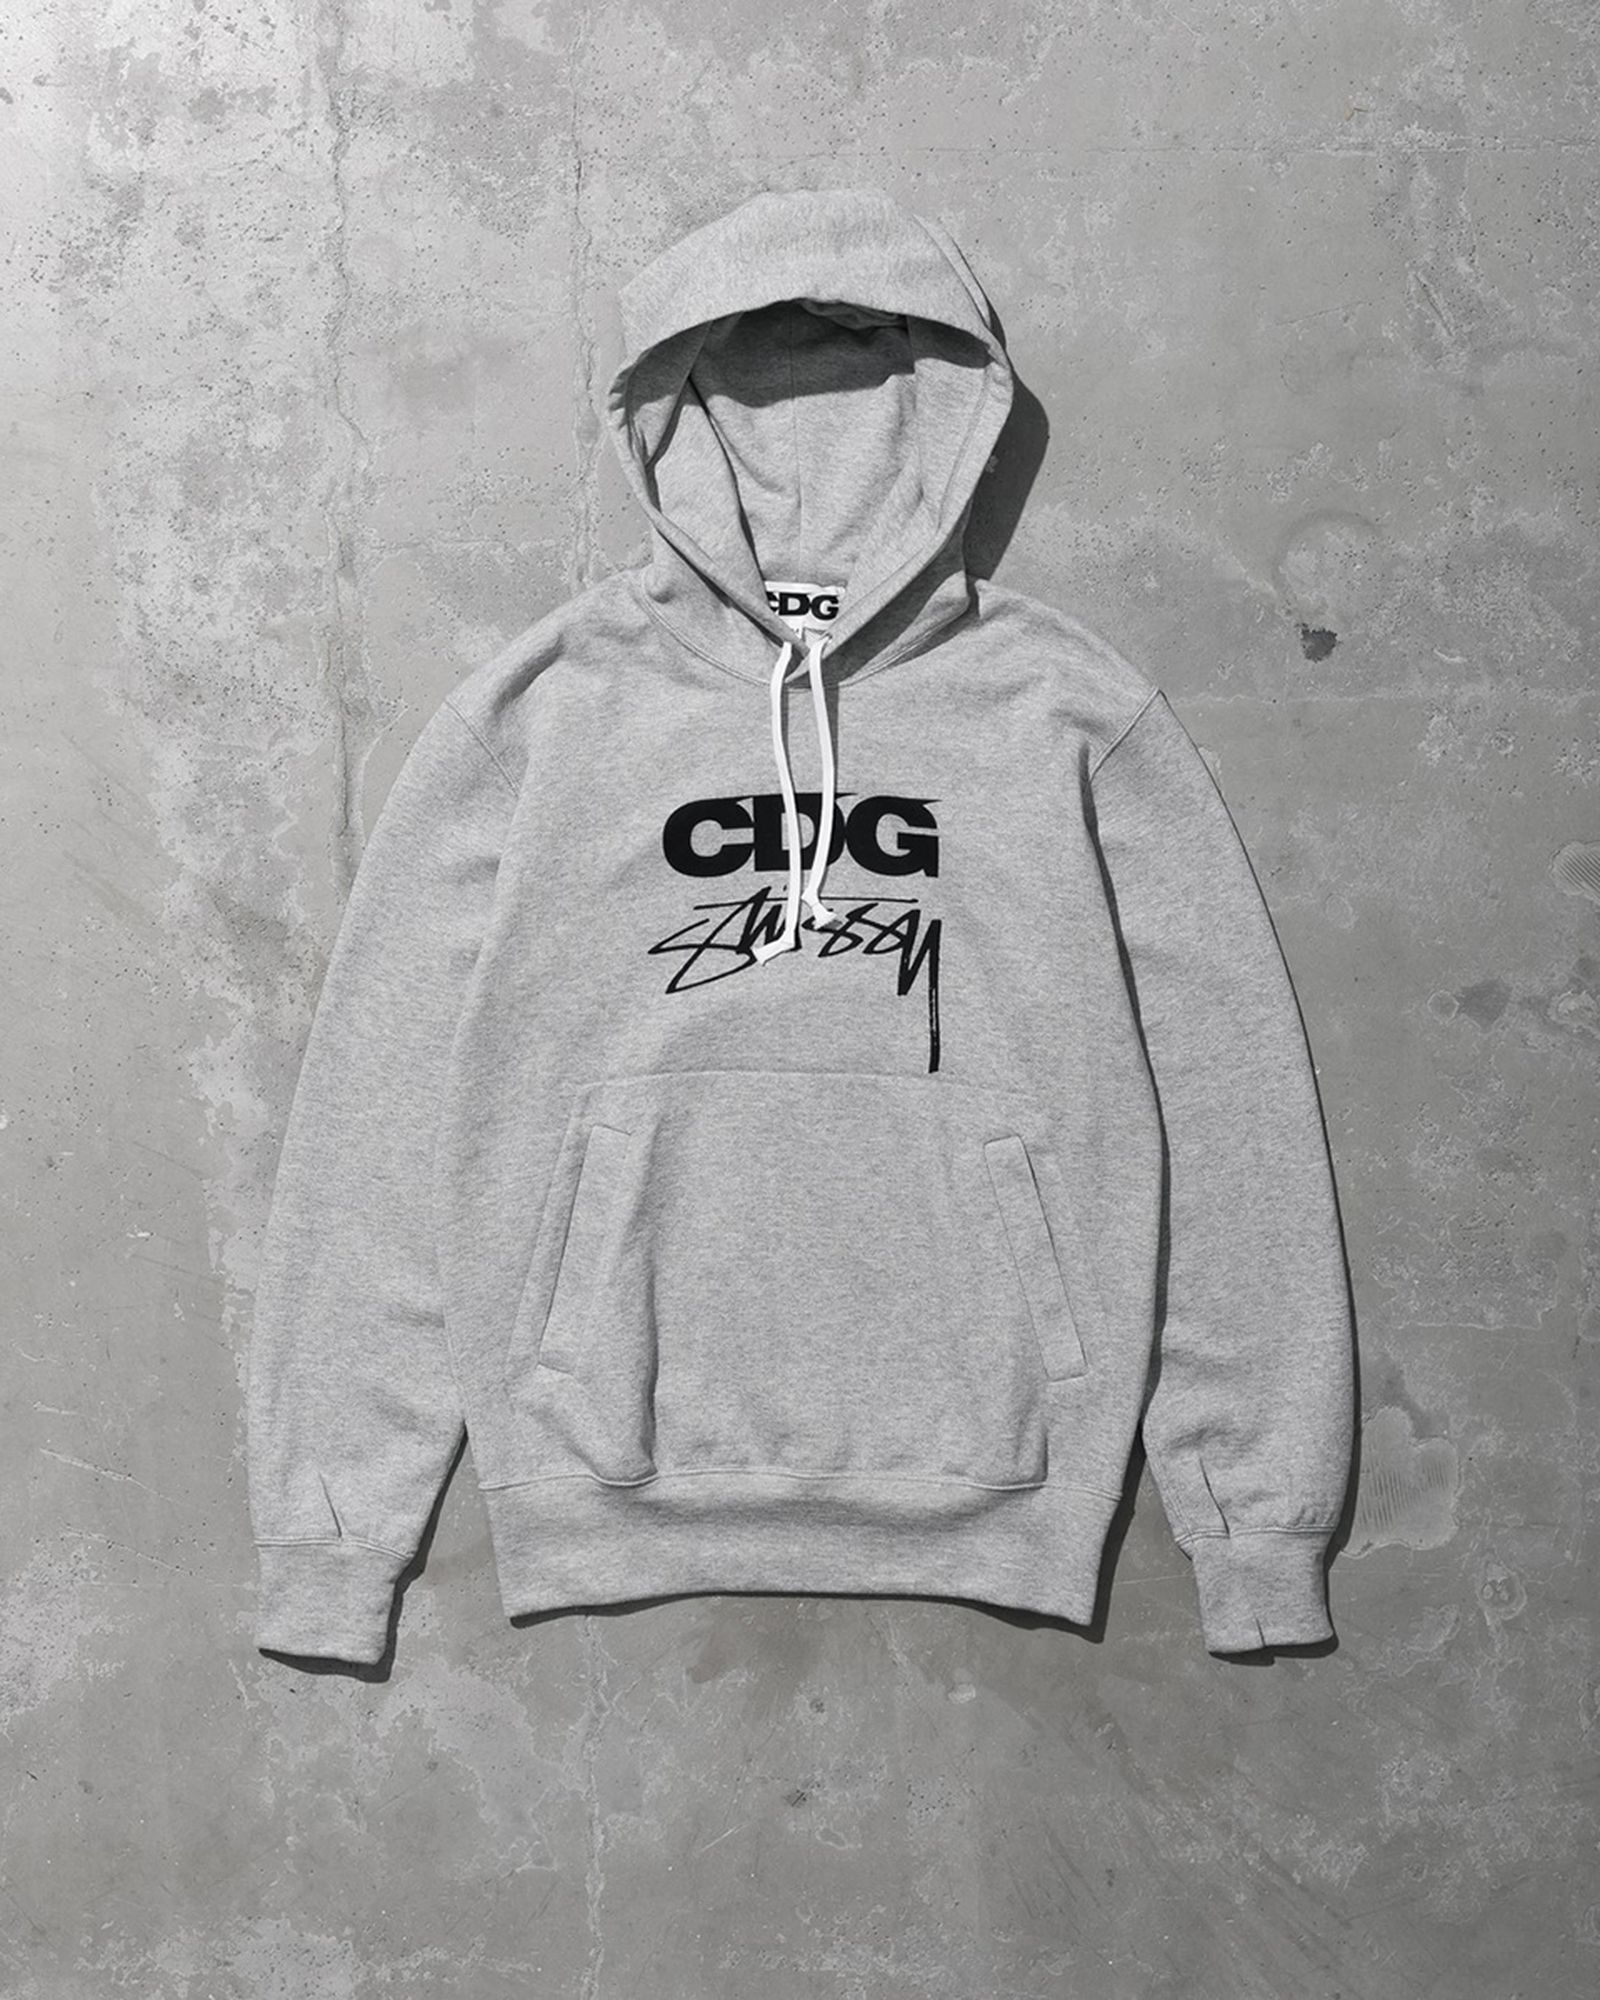 stussy cdg comme des garcons collaboration collection release date info buy hoodie coaches jacket tee shirt fw21 fall winter 2021 buy price